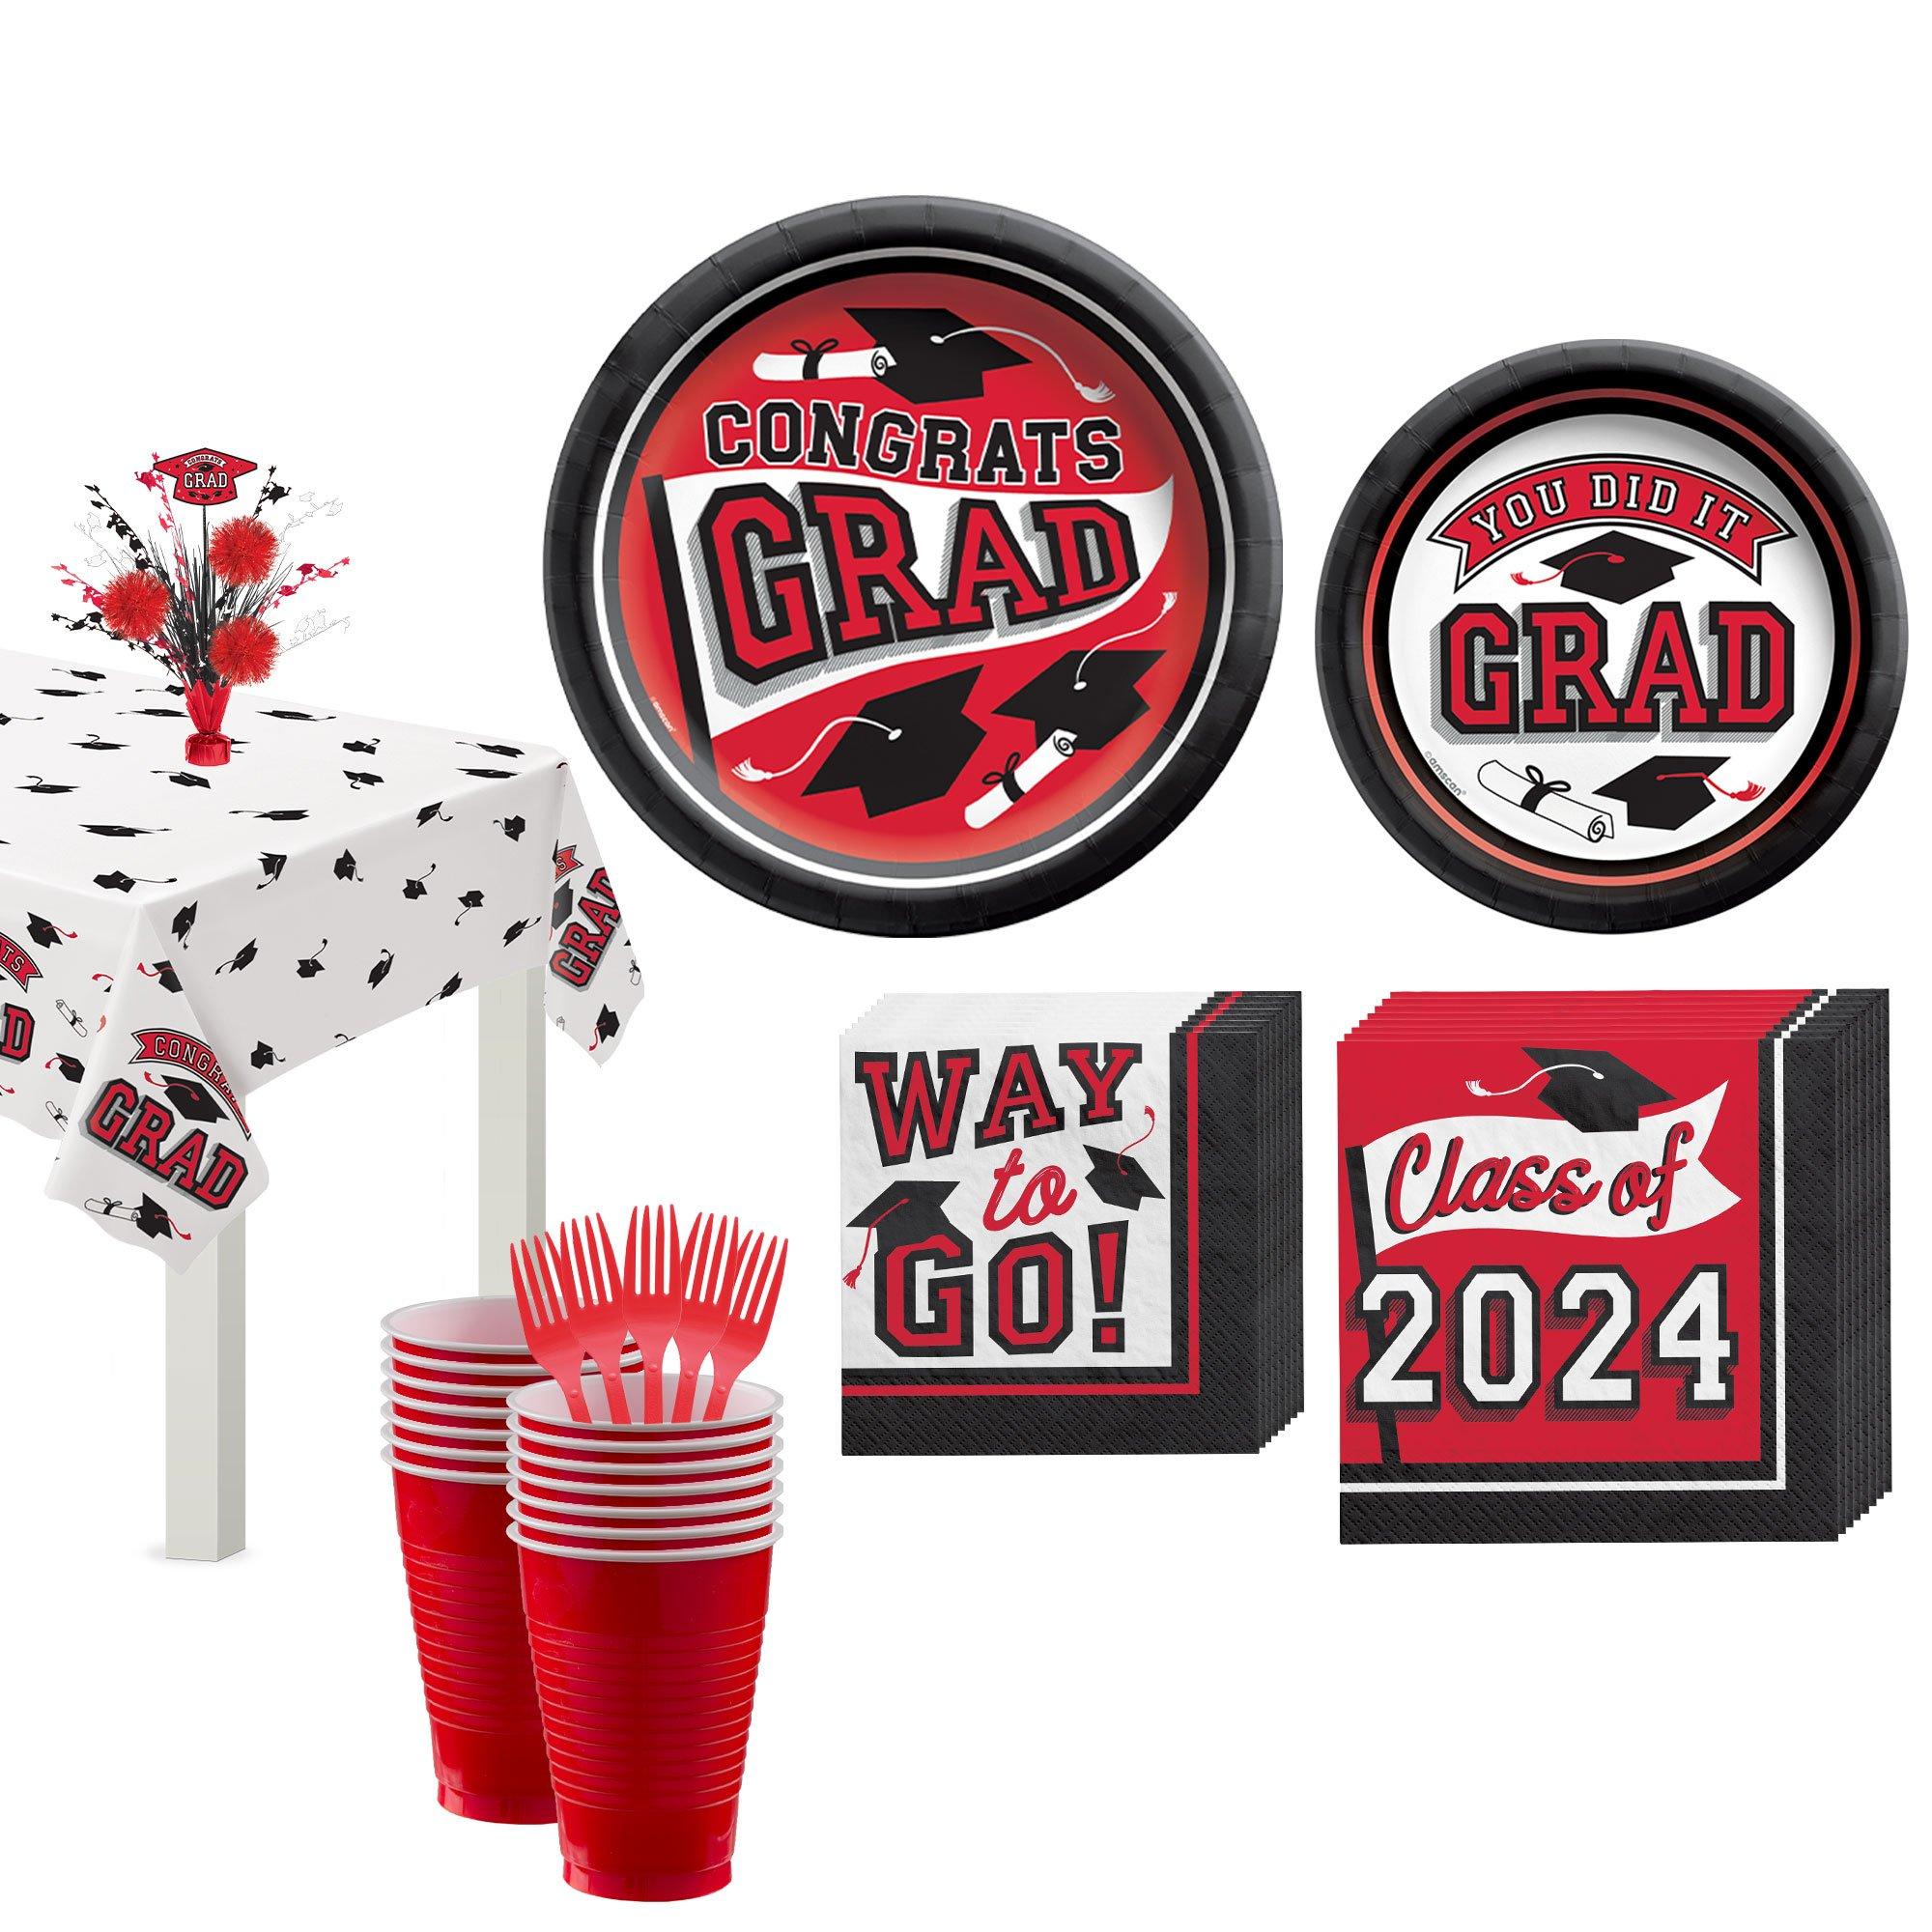 Graduation Party Supplies Kit for 20 with Decorations, Plates, Napkins, Cups - Red Congrats Grad